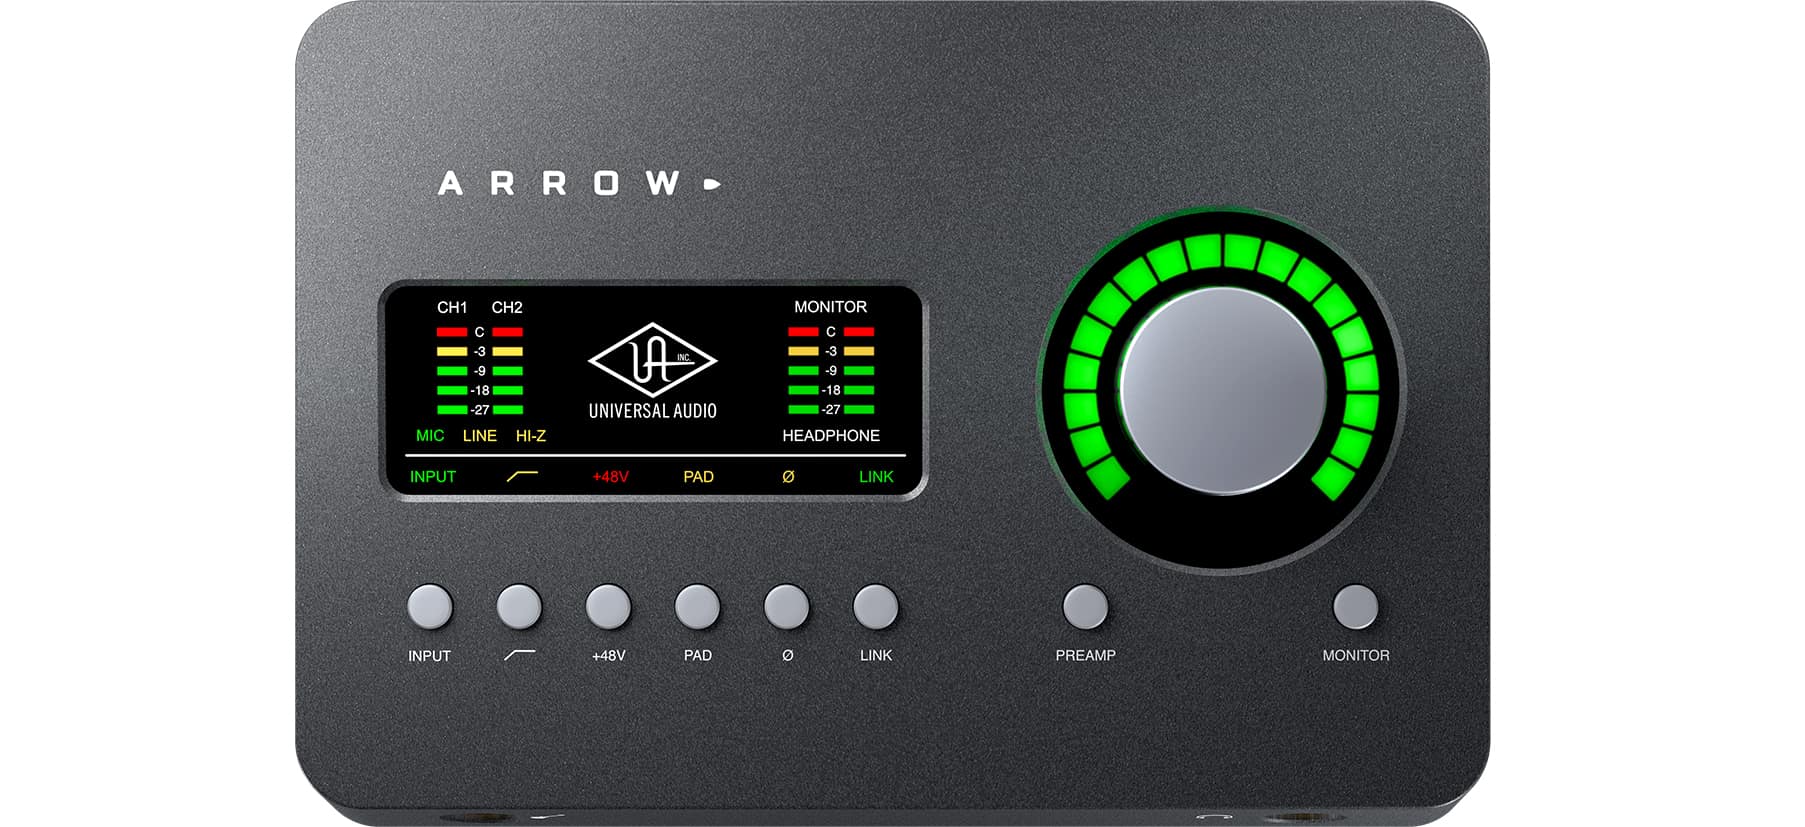 Universal Audio Arrow and OWC Envoy Pro EX review